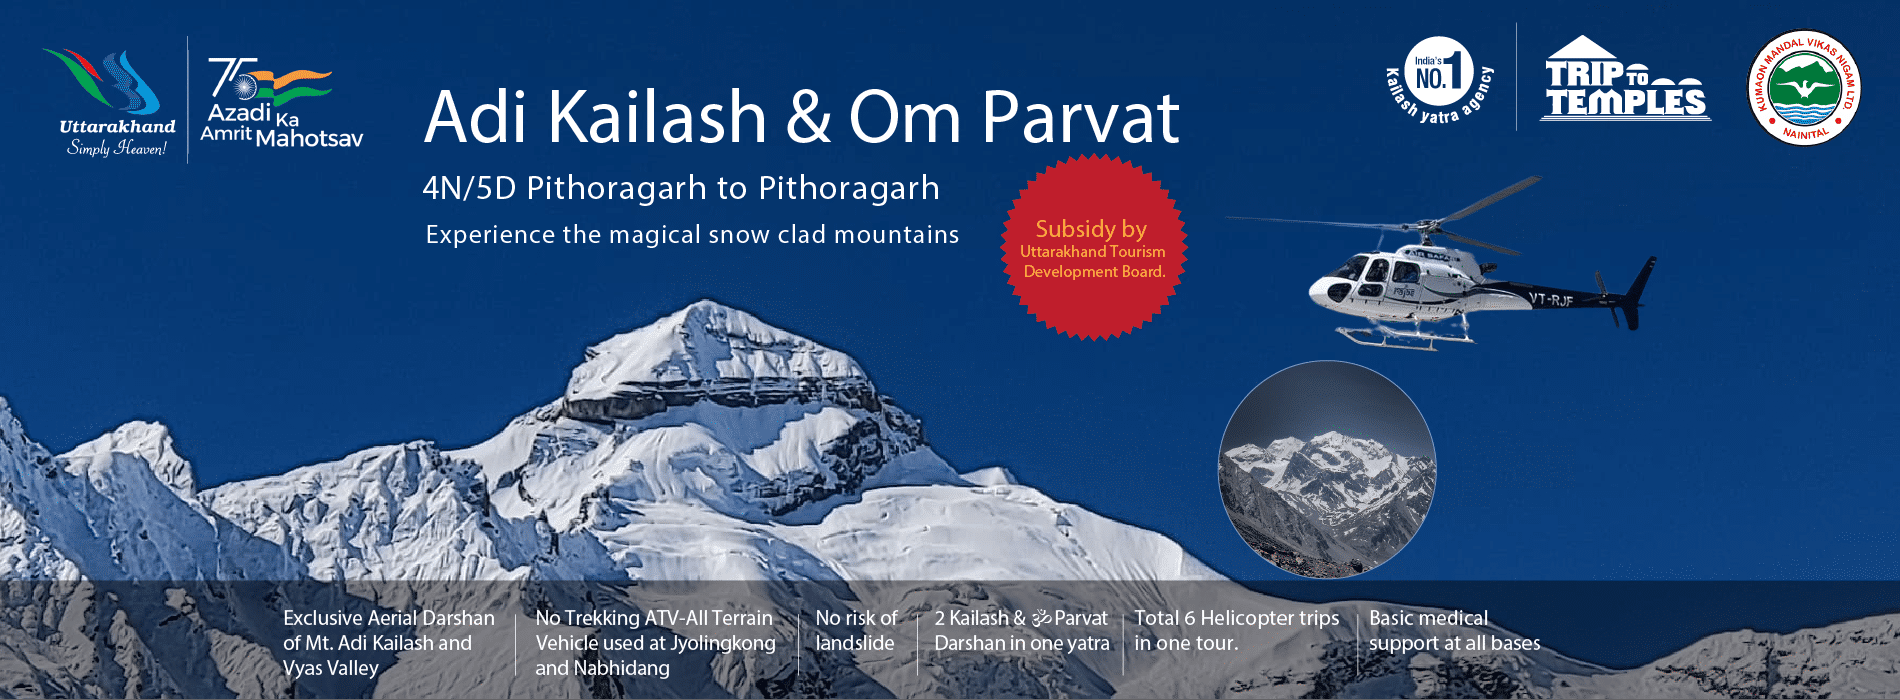 Adi Kailash And Om Parvat with Kailash Mansarovar Darshan By Helicopter